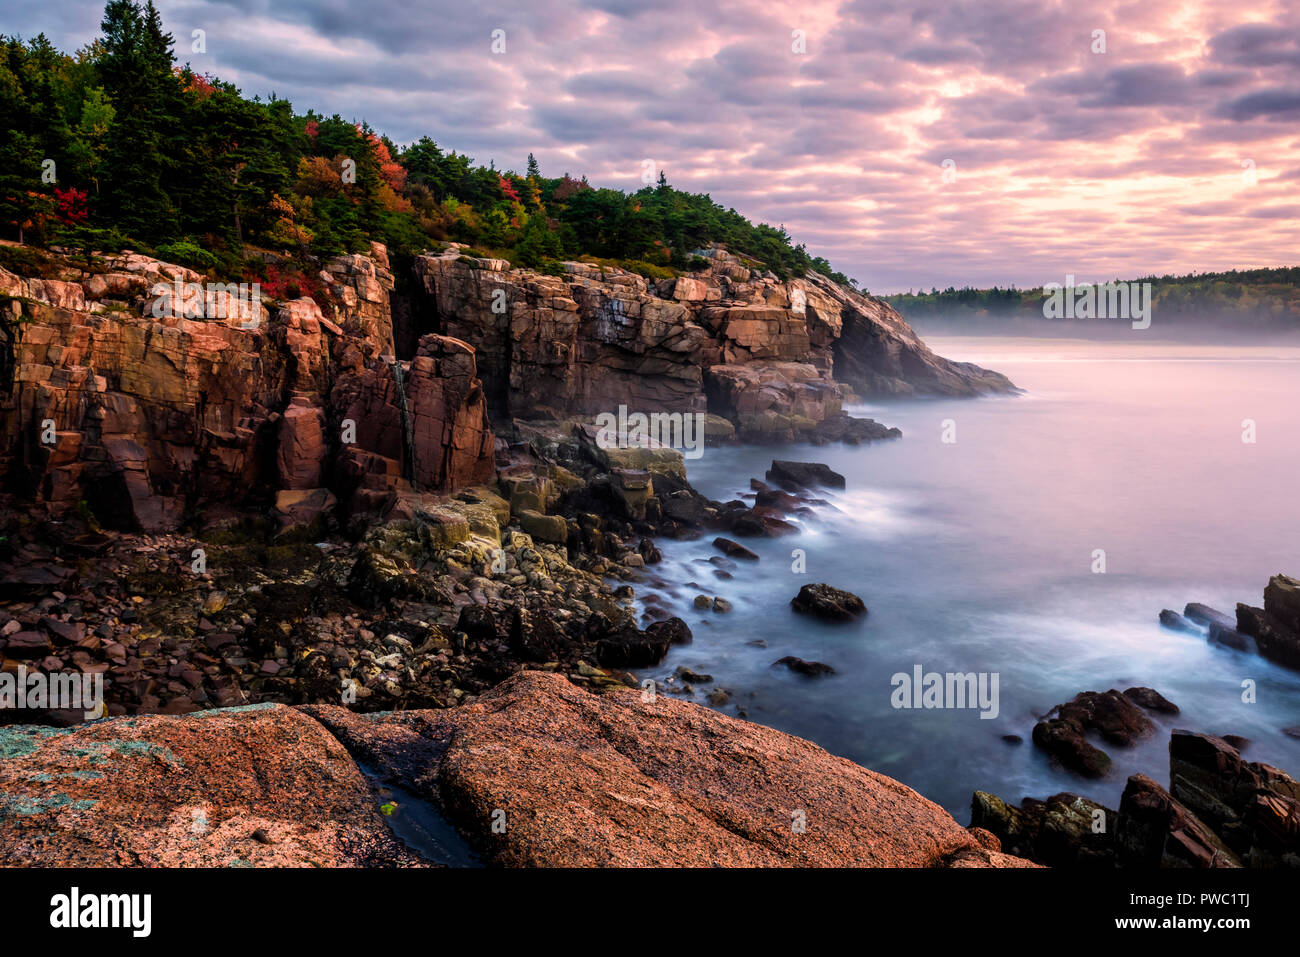 Autumn at Newport Cove in Acadia National Park, Maine. Stock Photo